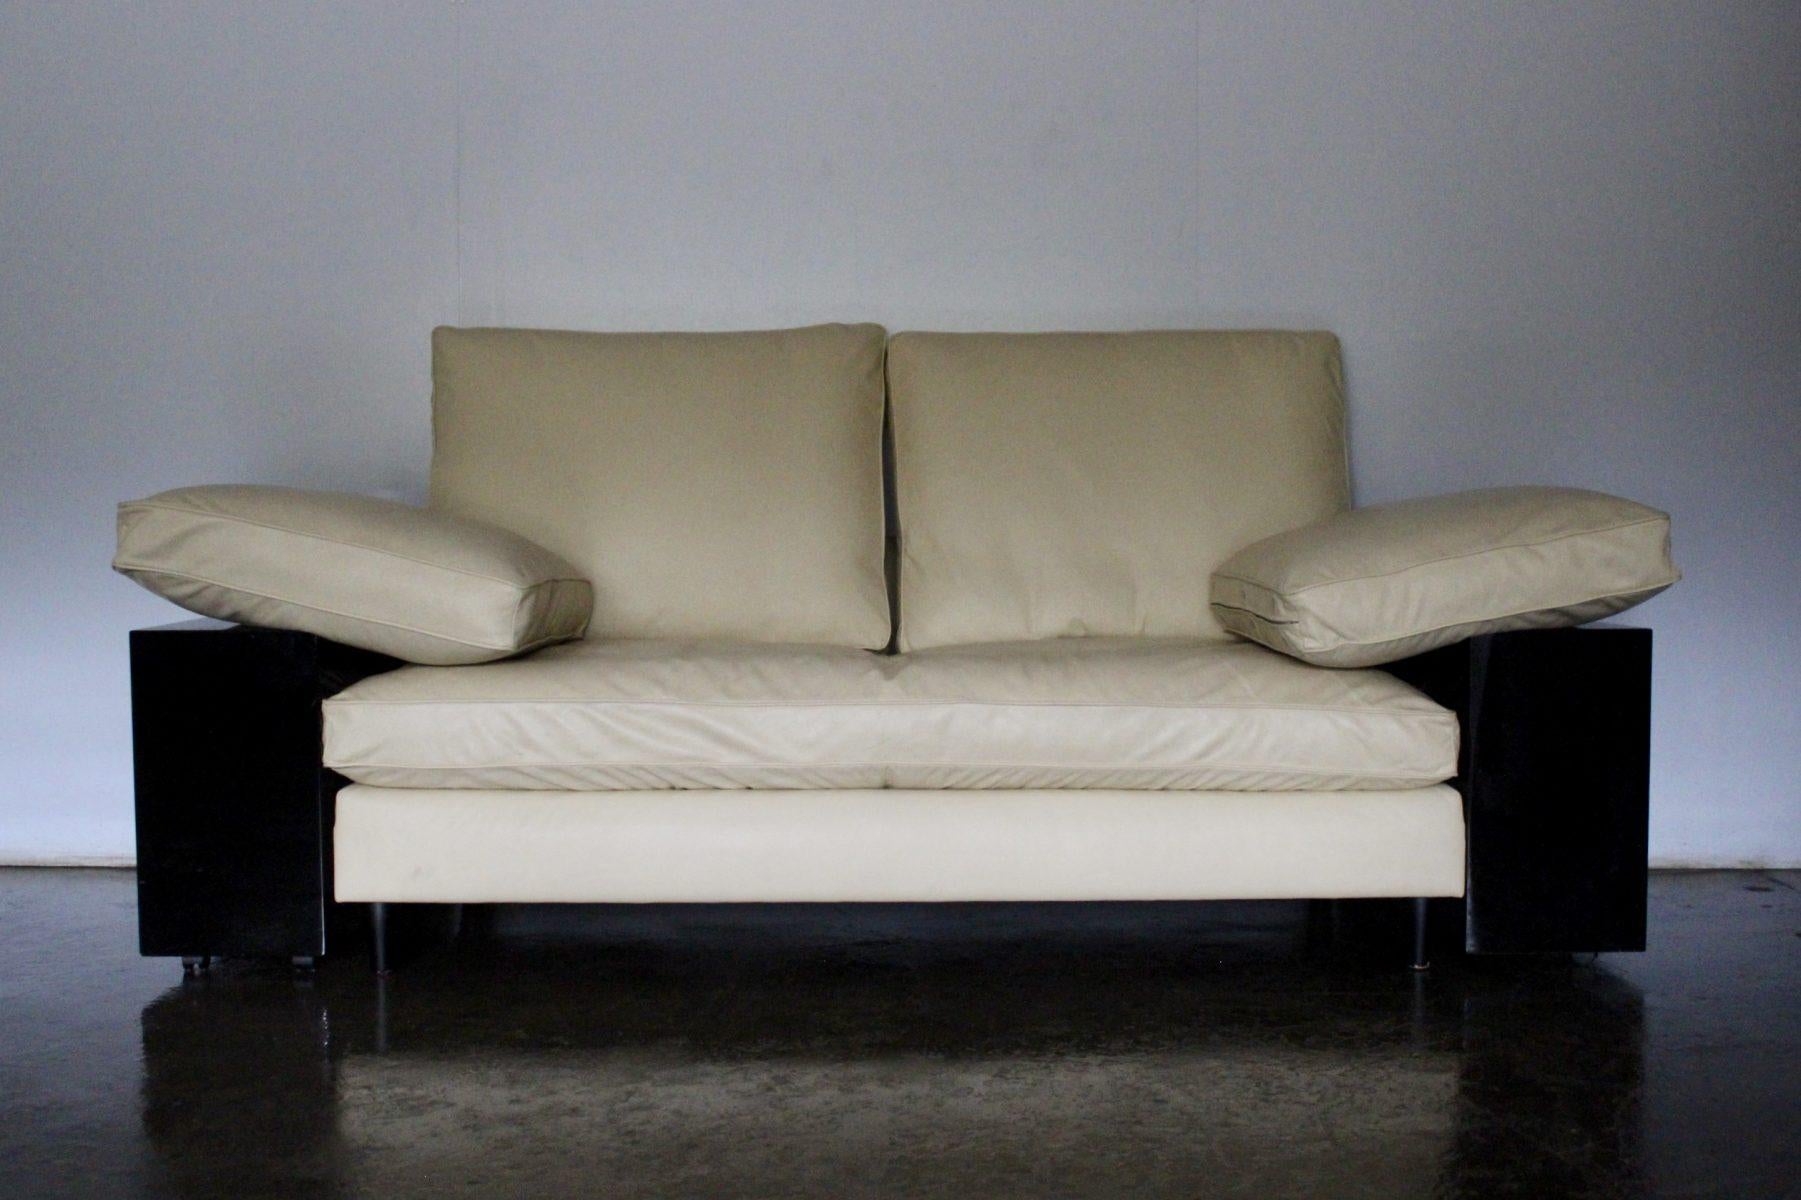 On offer on this occasion is a rare, original pair of “Eileen Gray Lota” Sofas, from the world renown furniture house of Aram, dressed in a sublime, tactile Cream Leather, and with Black Lacquered Boxes.

As you will no doubt be aware by your